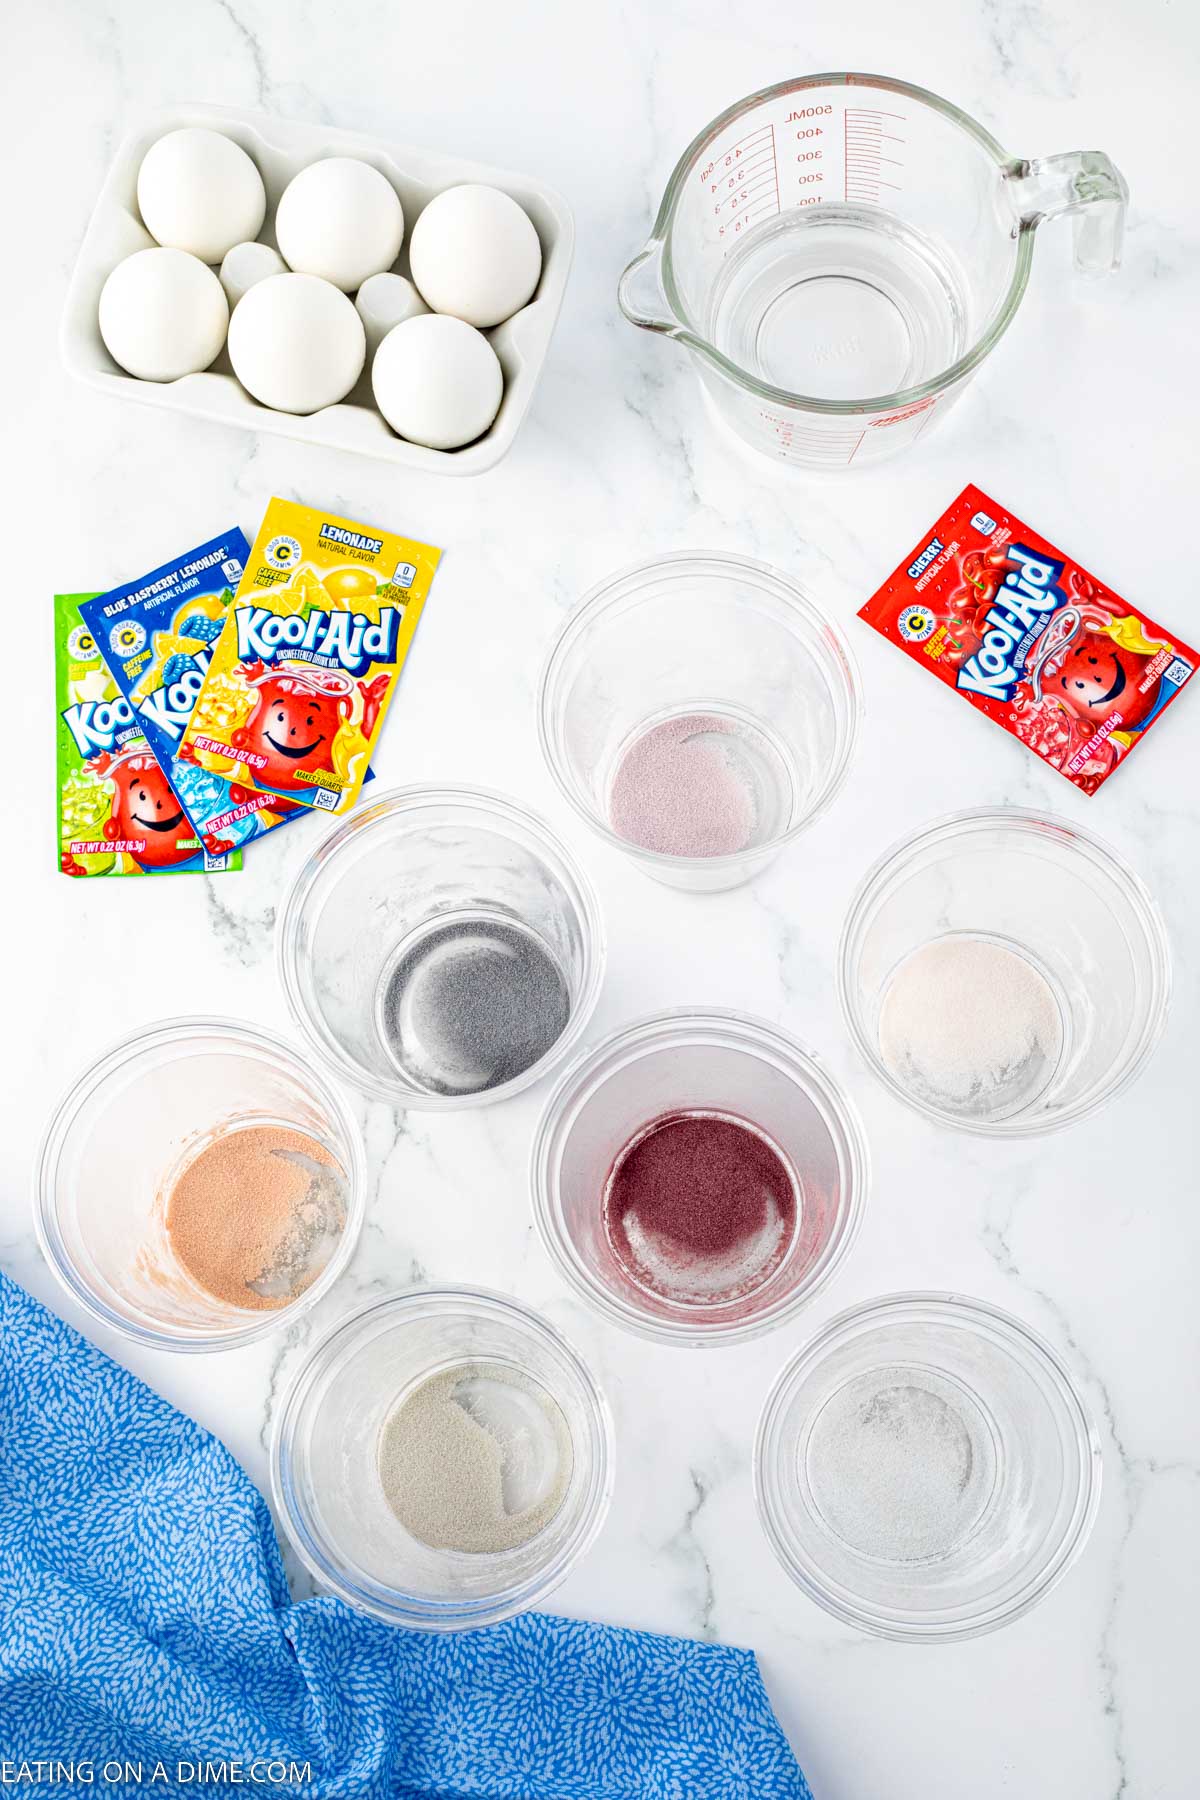 Placing the koolaid packets in cups with a carton of eggs